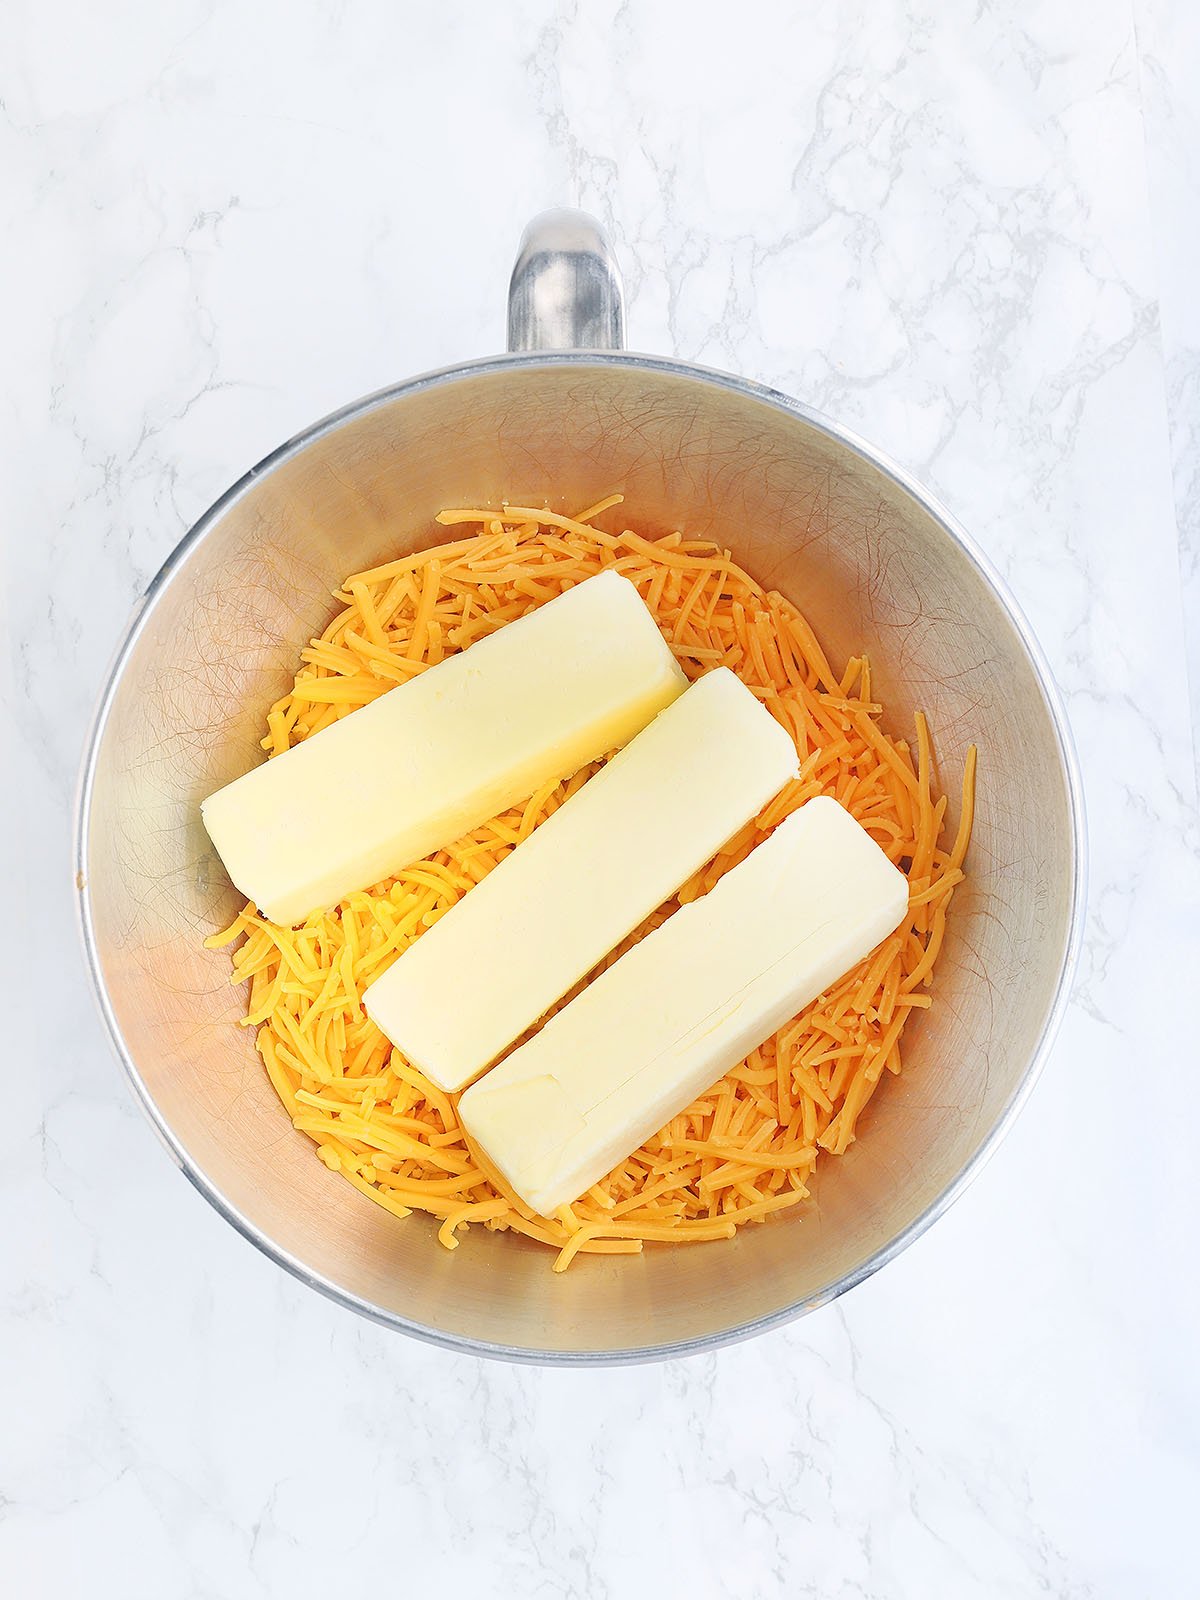 shredded cheddar cheese and three stick of butter in a metal mixing bowl.